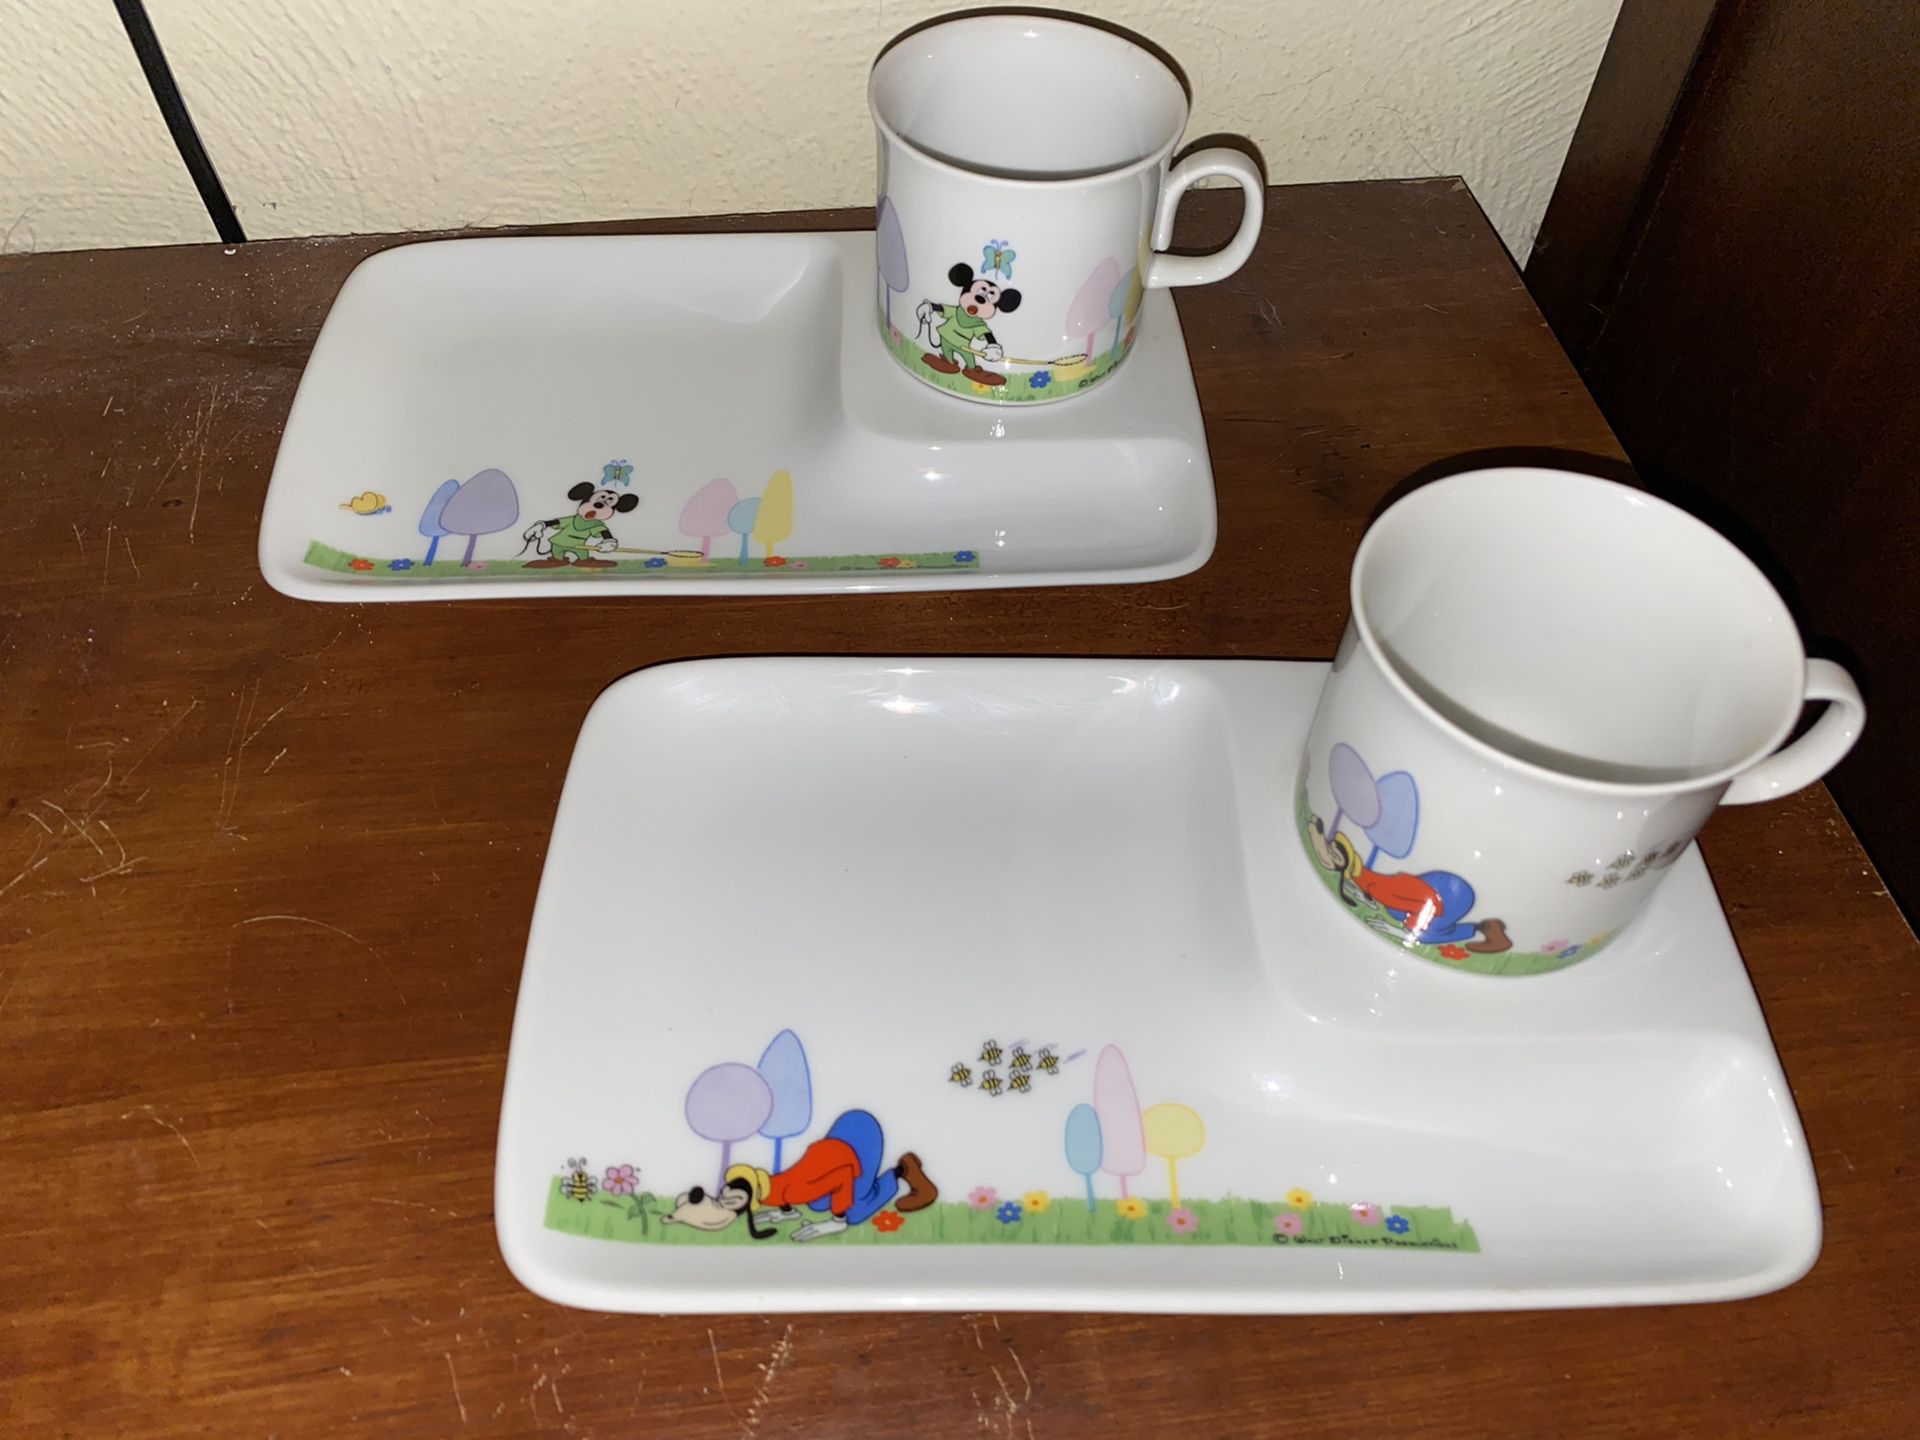 Disney Porcelain Plate and Cup